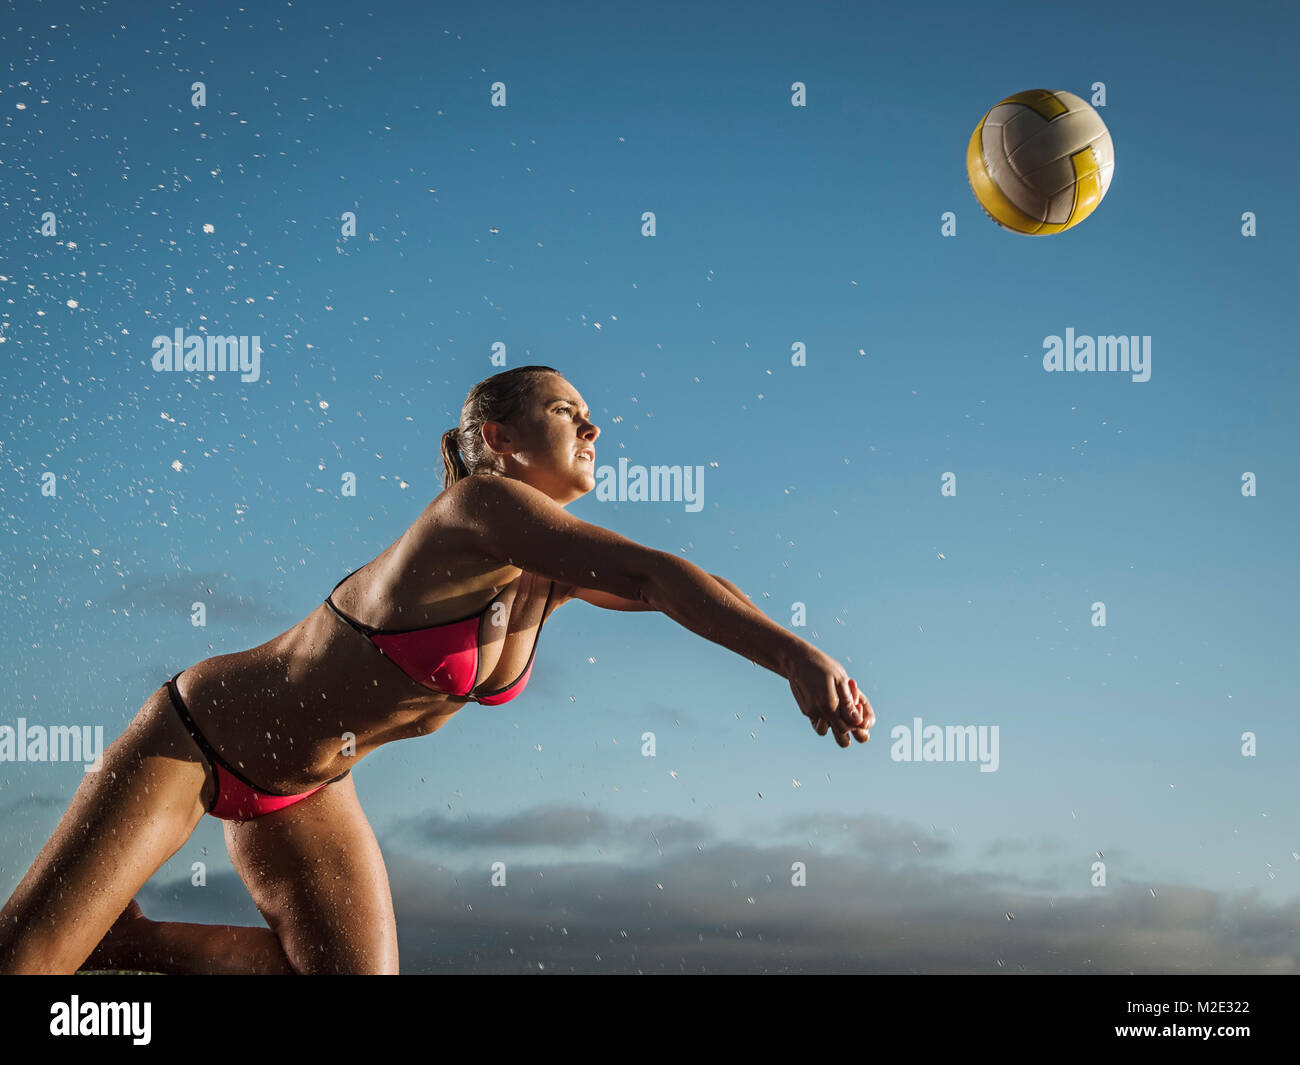 Caucasian woman diving to volleyball Stock Photo